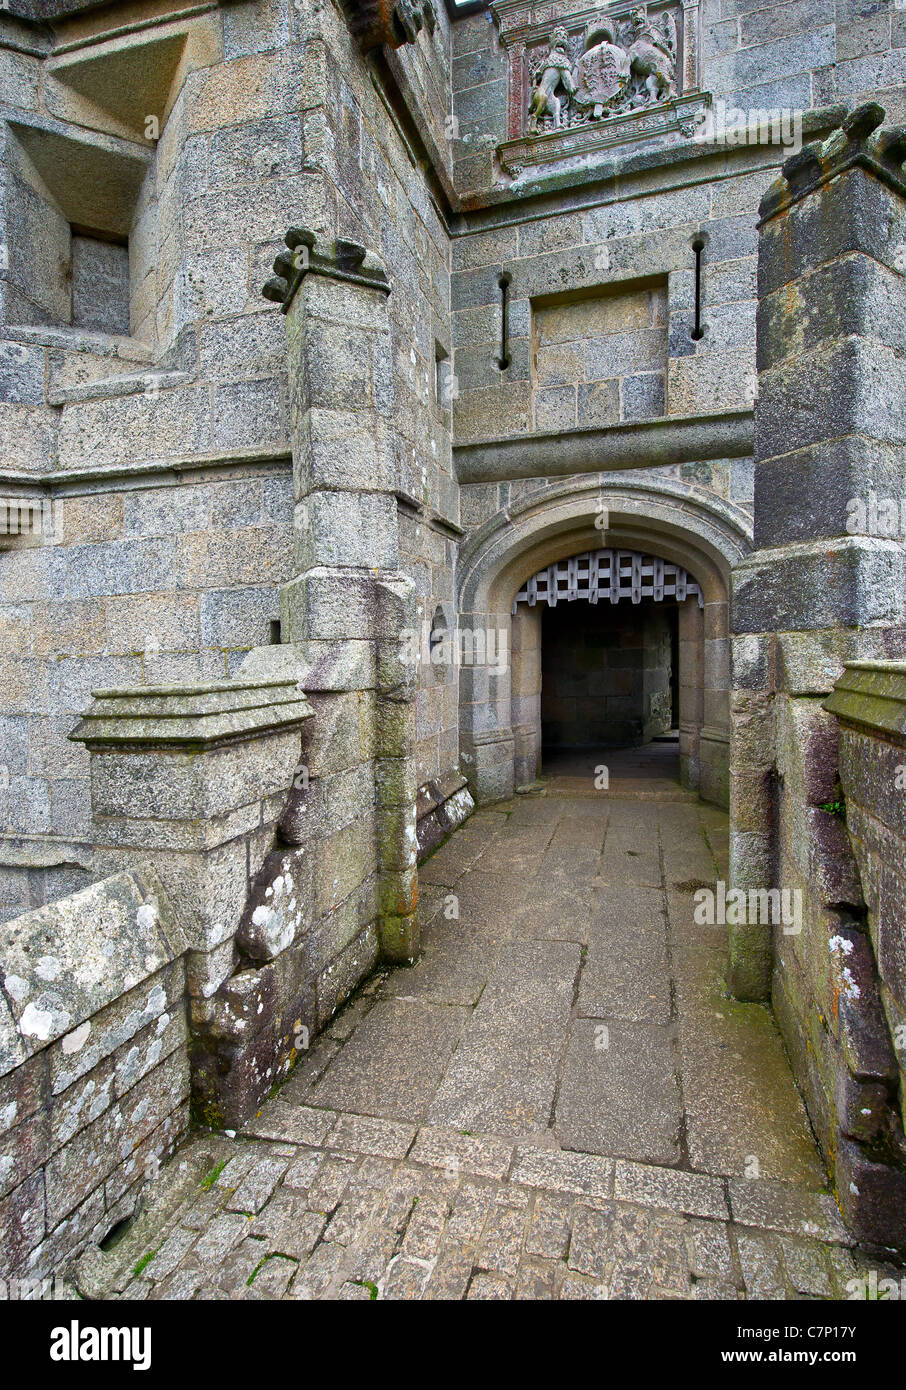 Der Eingang in die Pistole Turm bei Pendennis Castle in Falmouth Cornwall Stockfoto